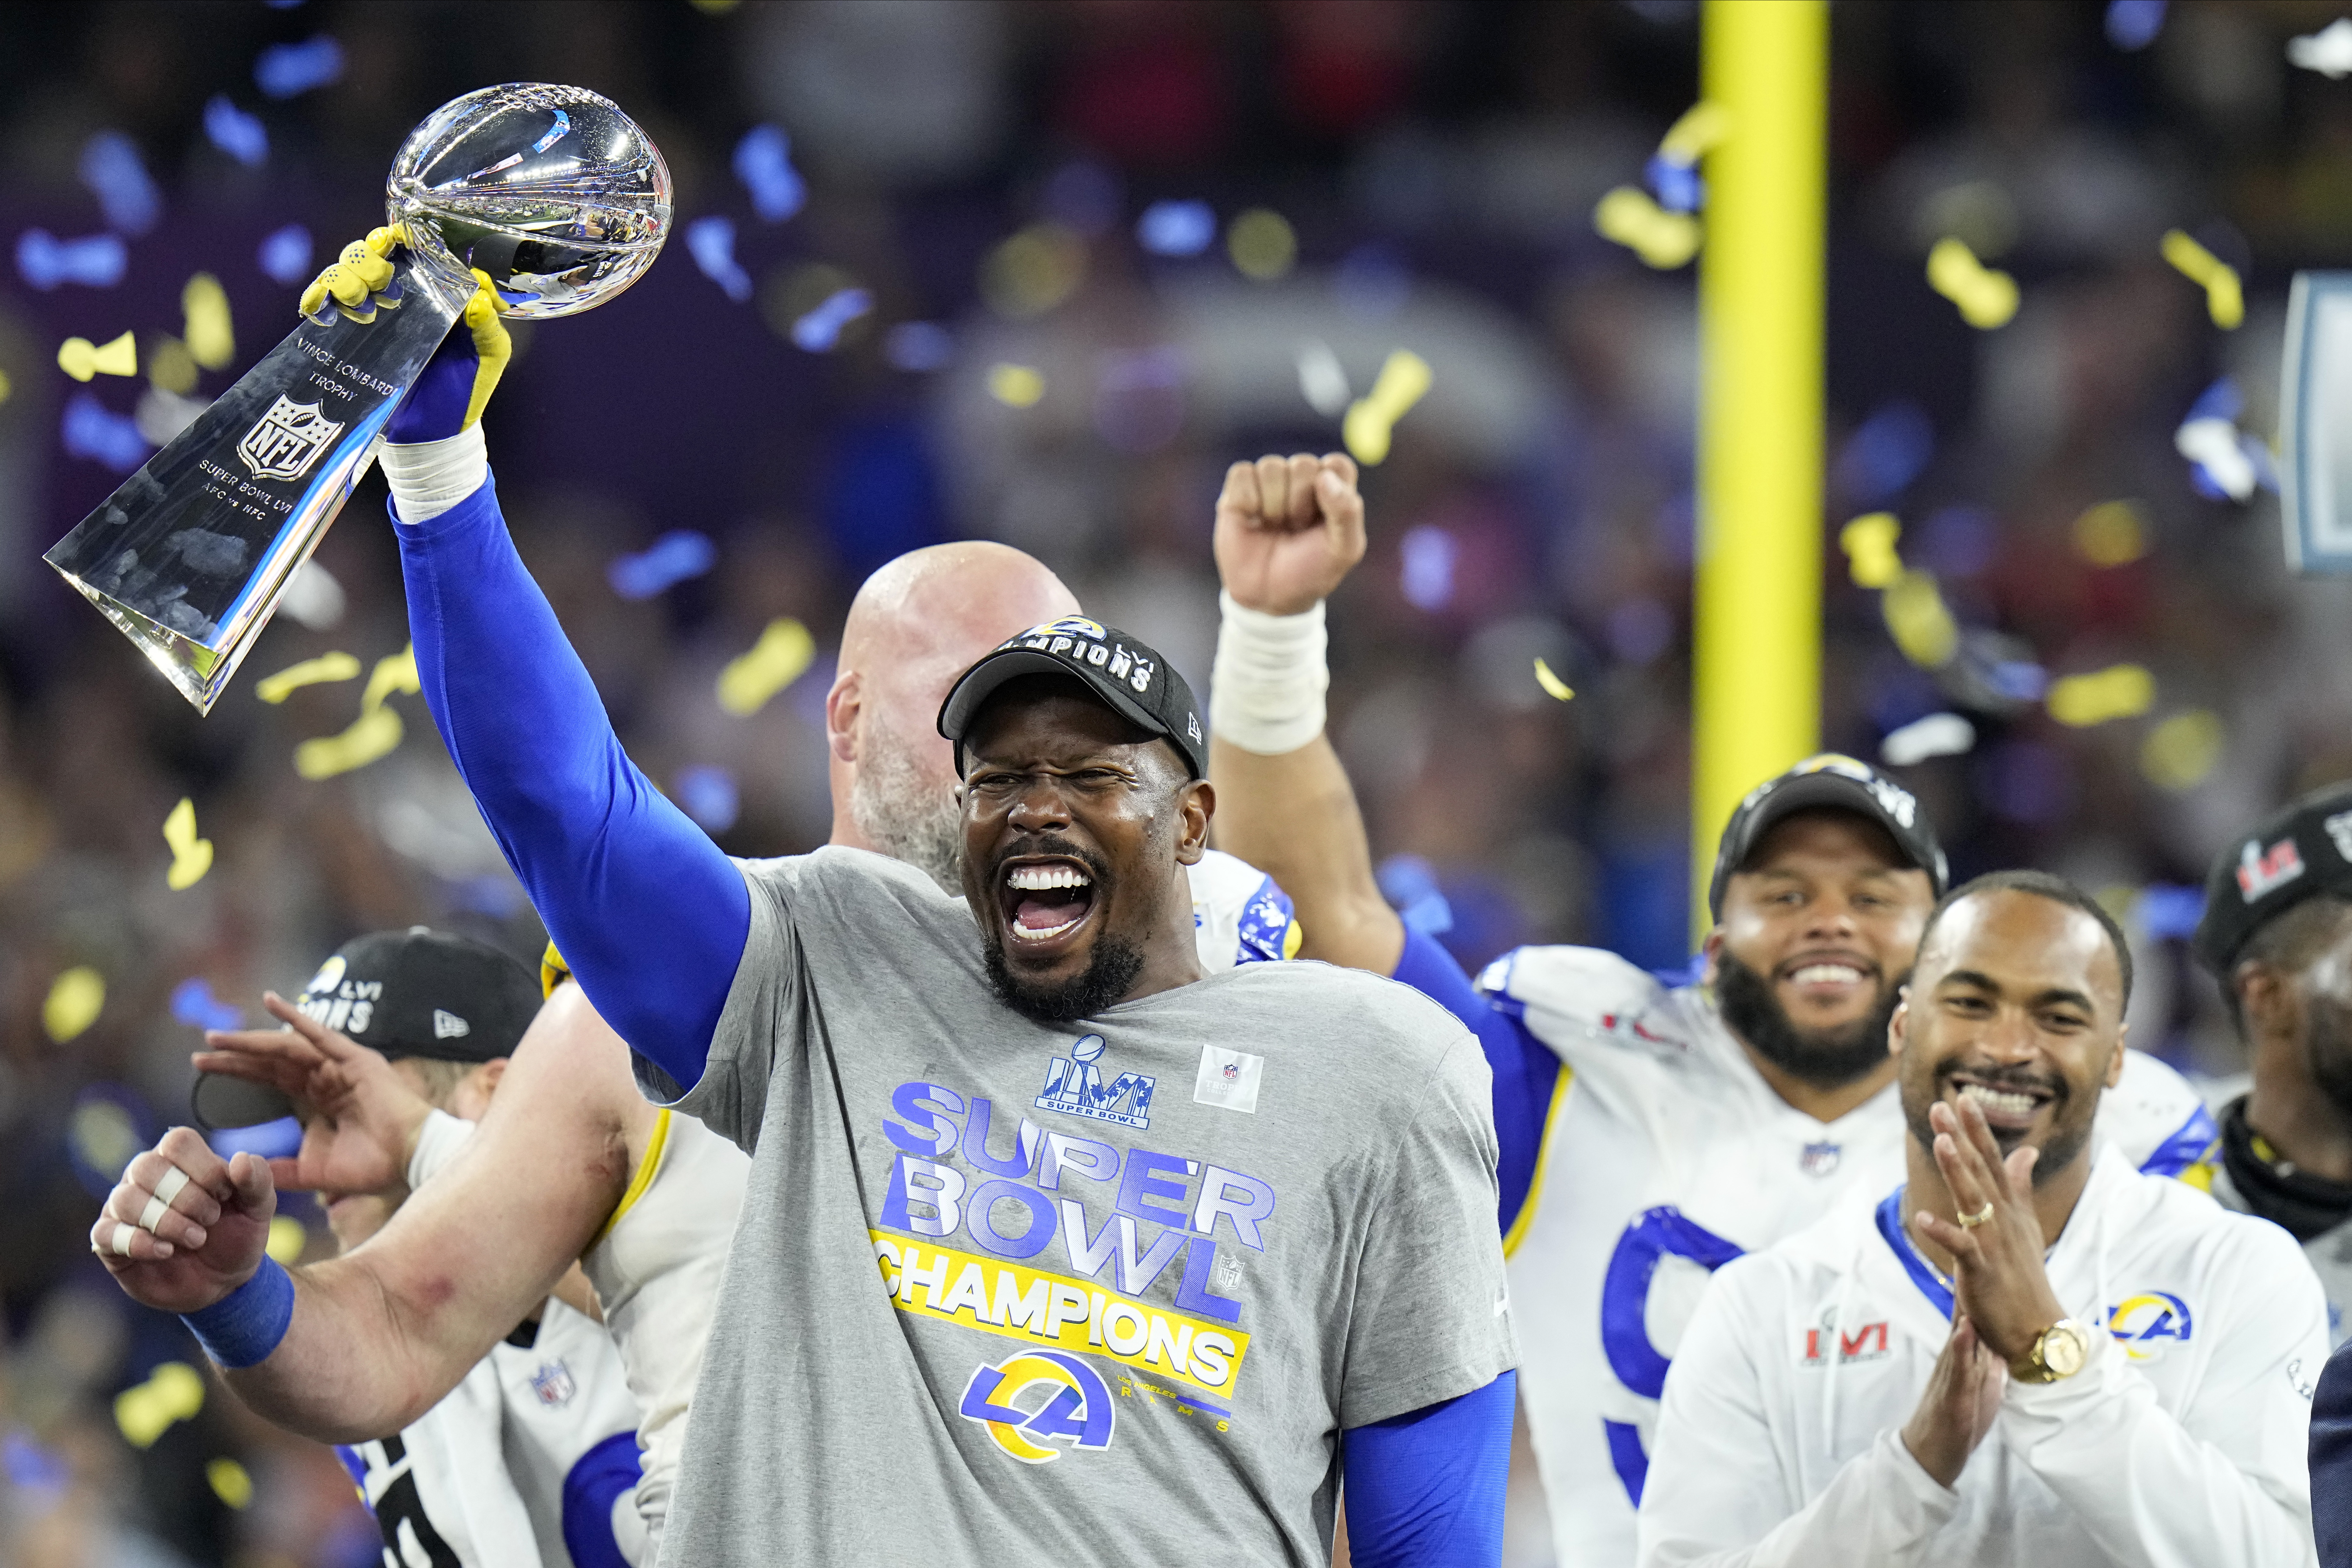 Super Bowl: How the Rams Beat the Bengals to Win the Super Bowl